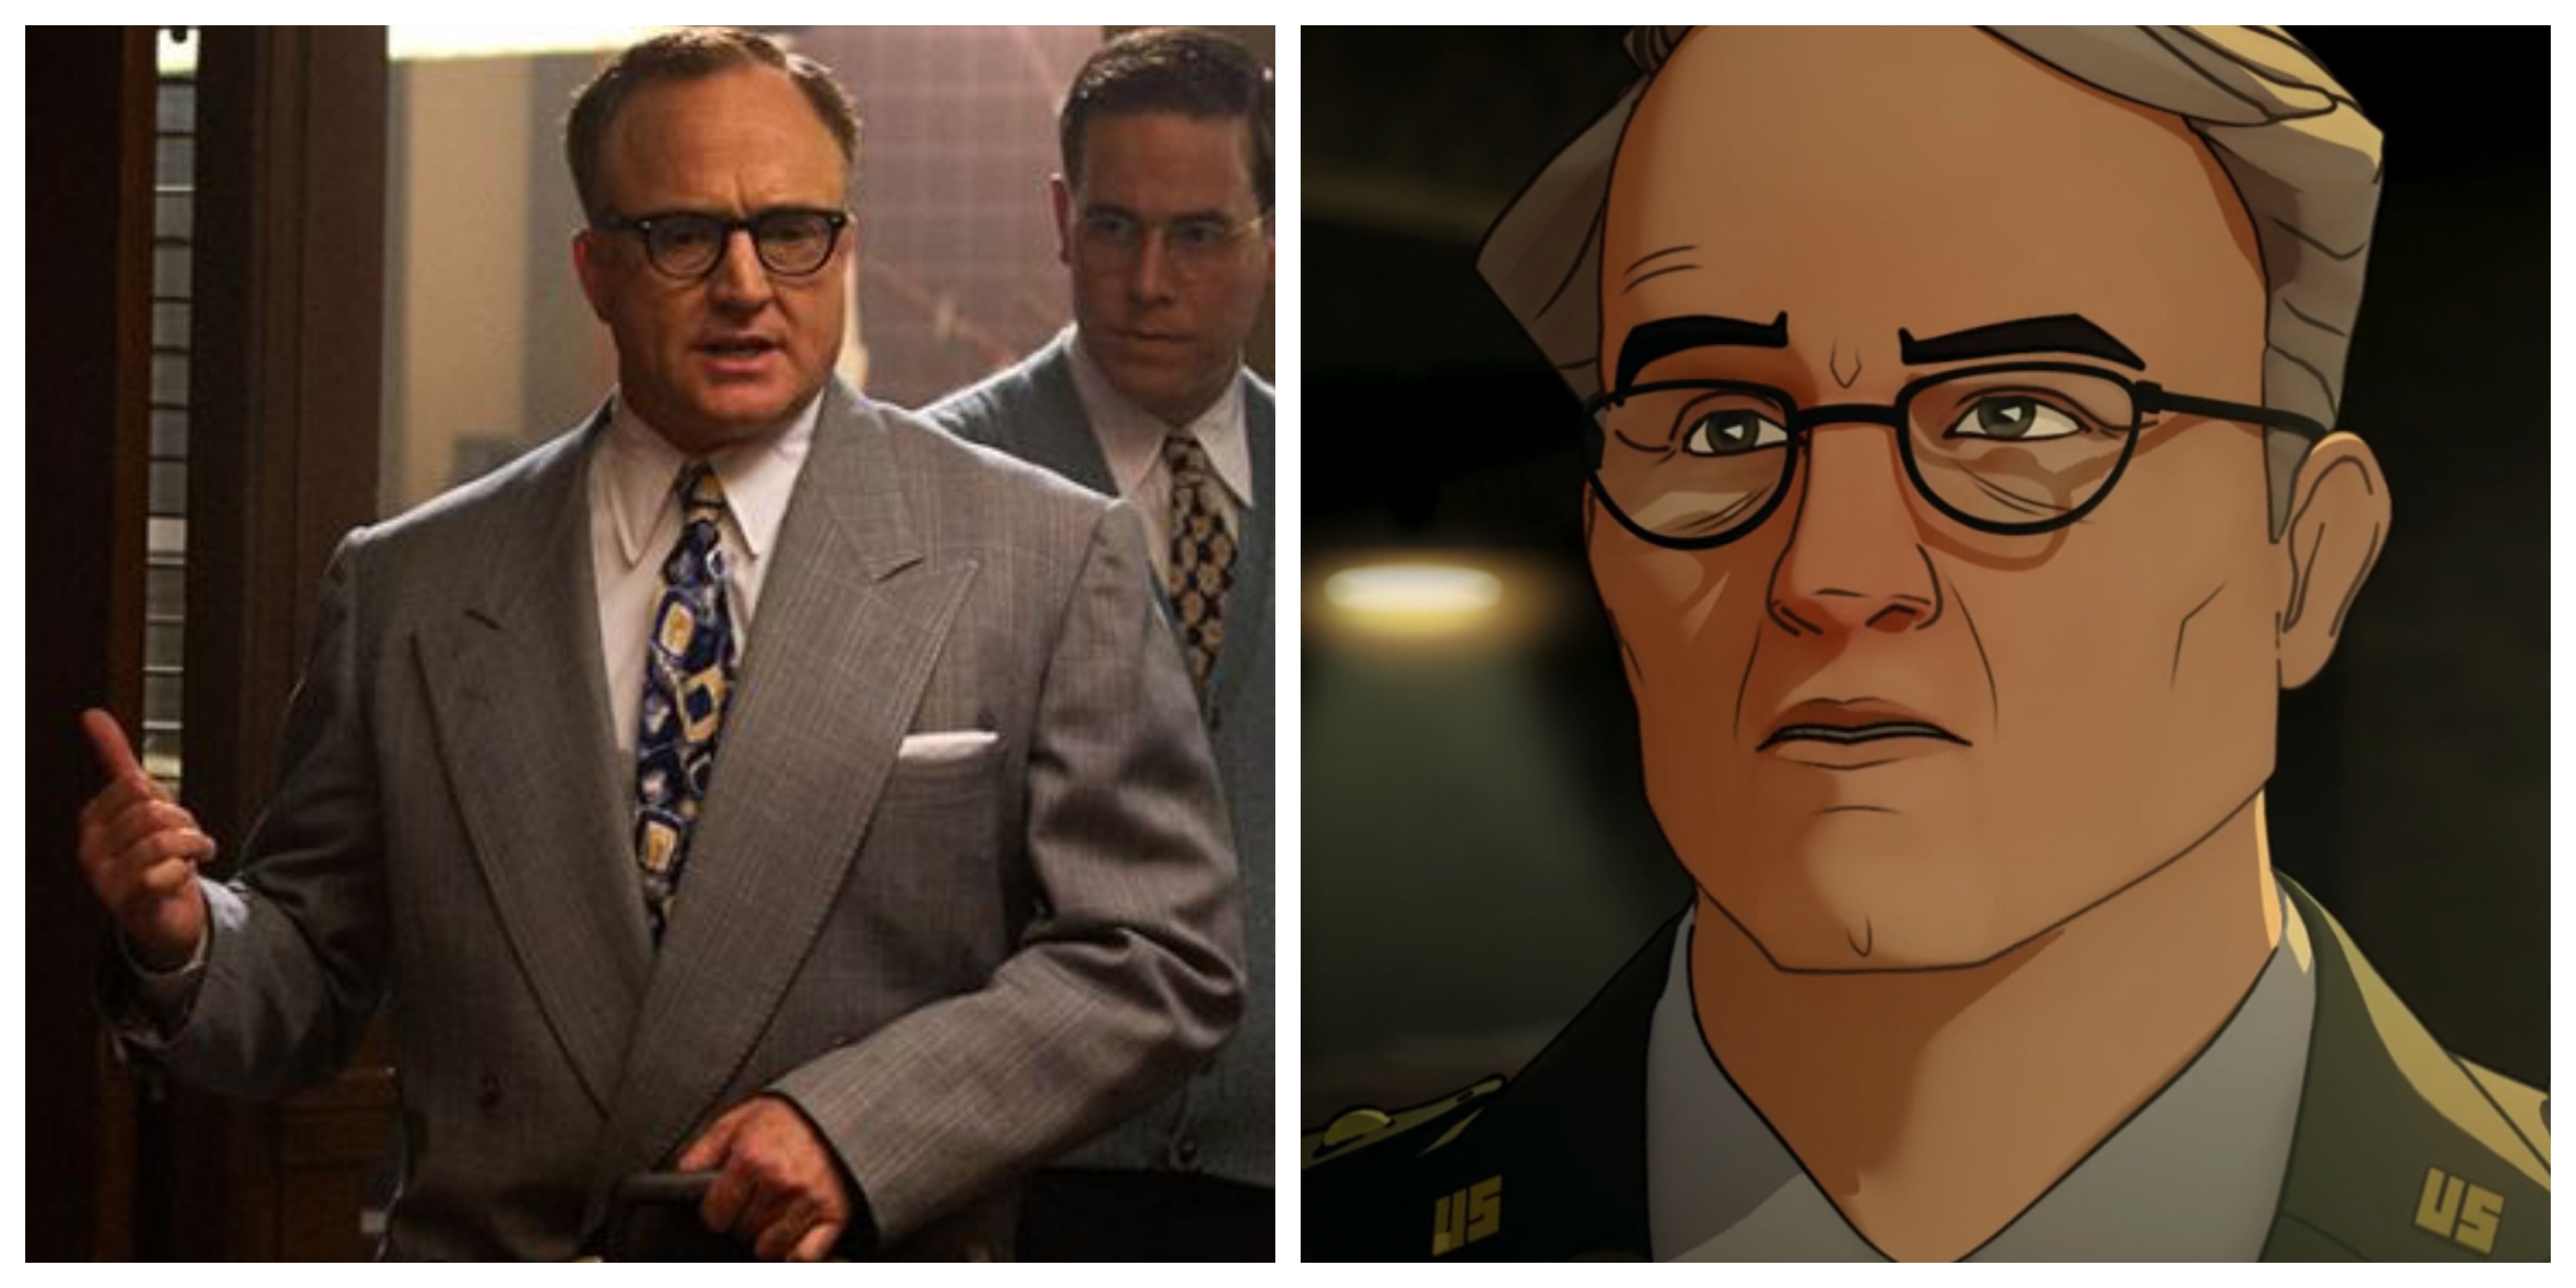 What If Voice Cast - Bradley Whitford as Colonel Flynn